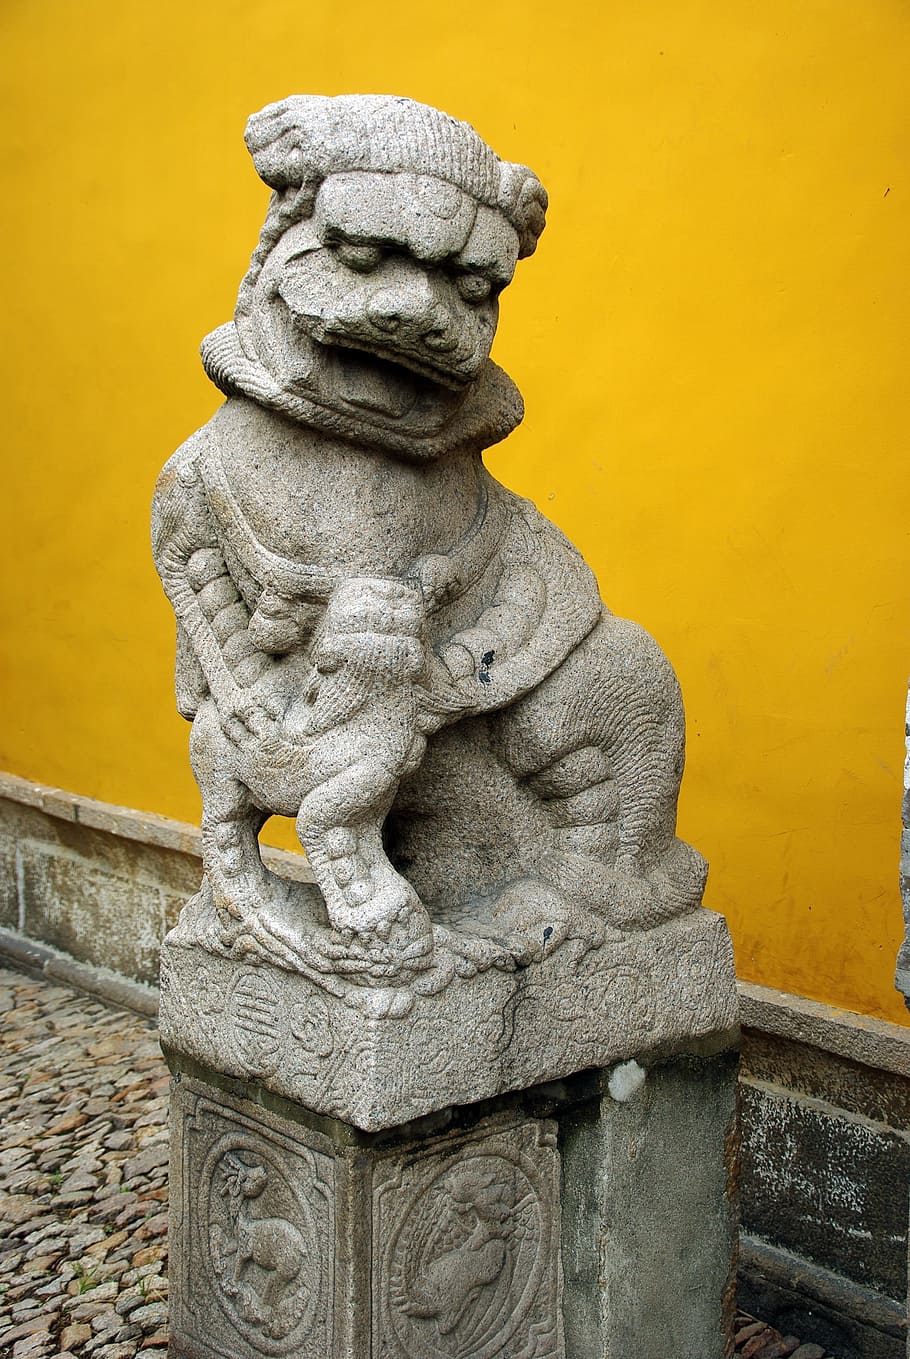 china, guilin, pilaster, sculpture, lion, pierre, decoration, art, art and craft, statue